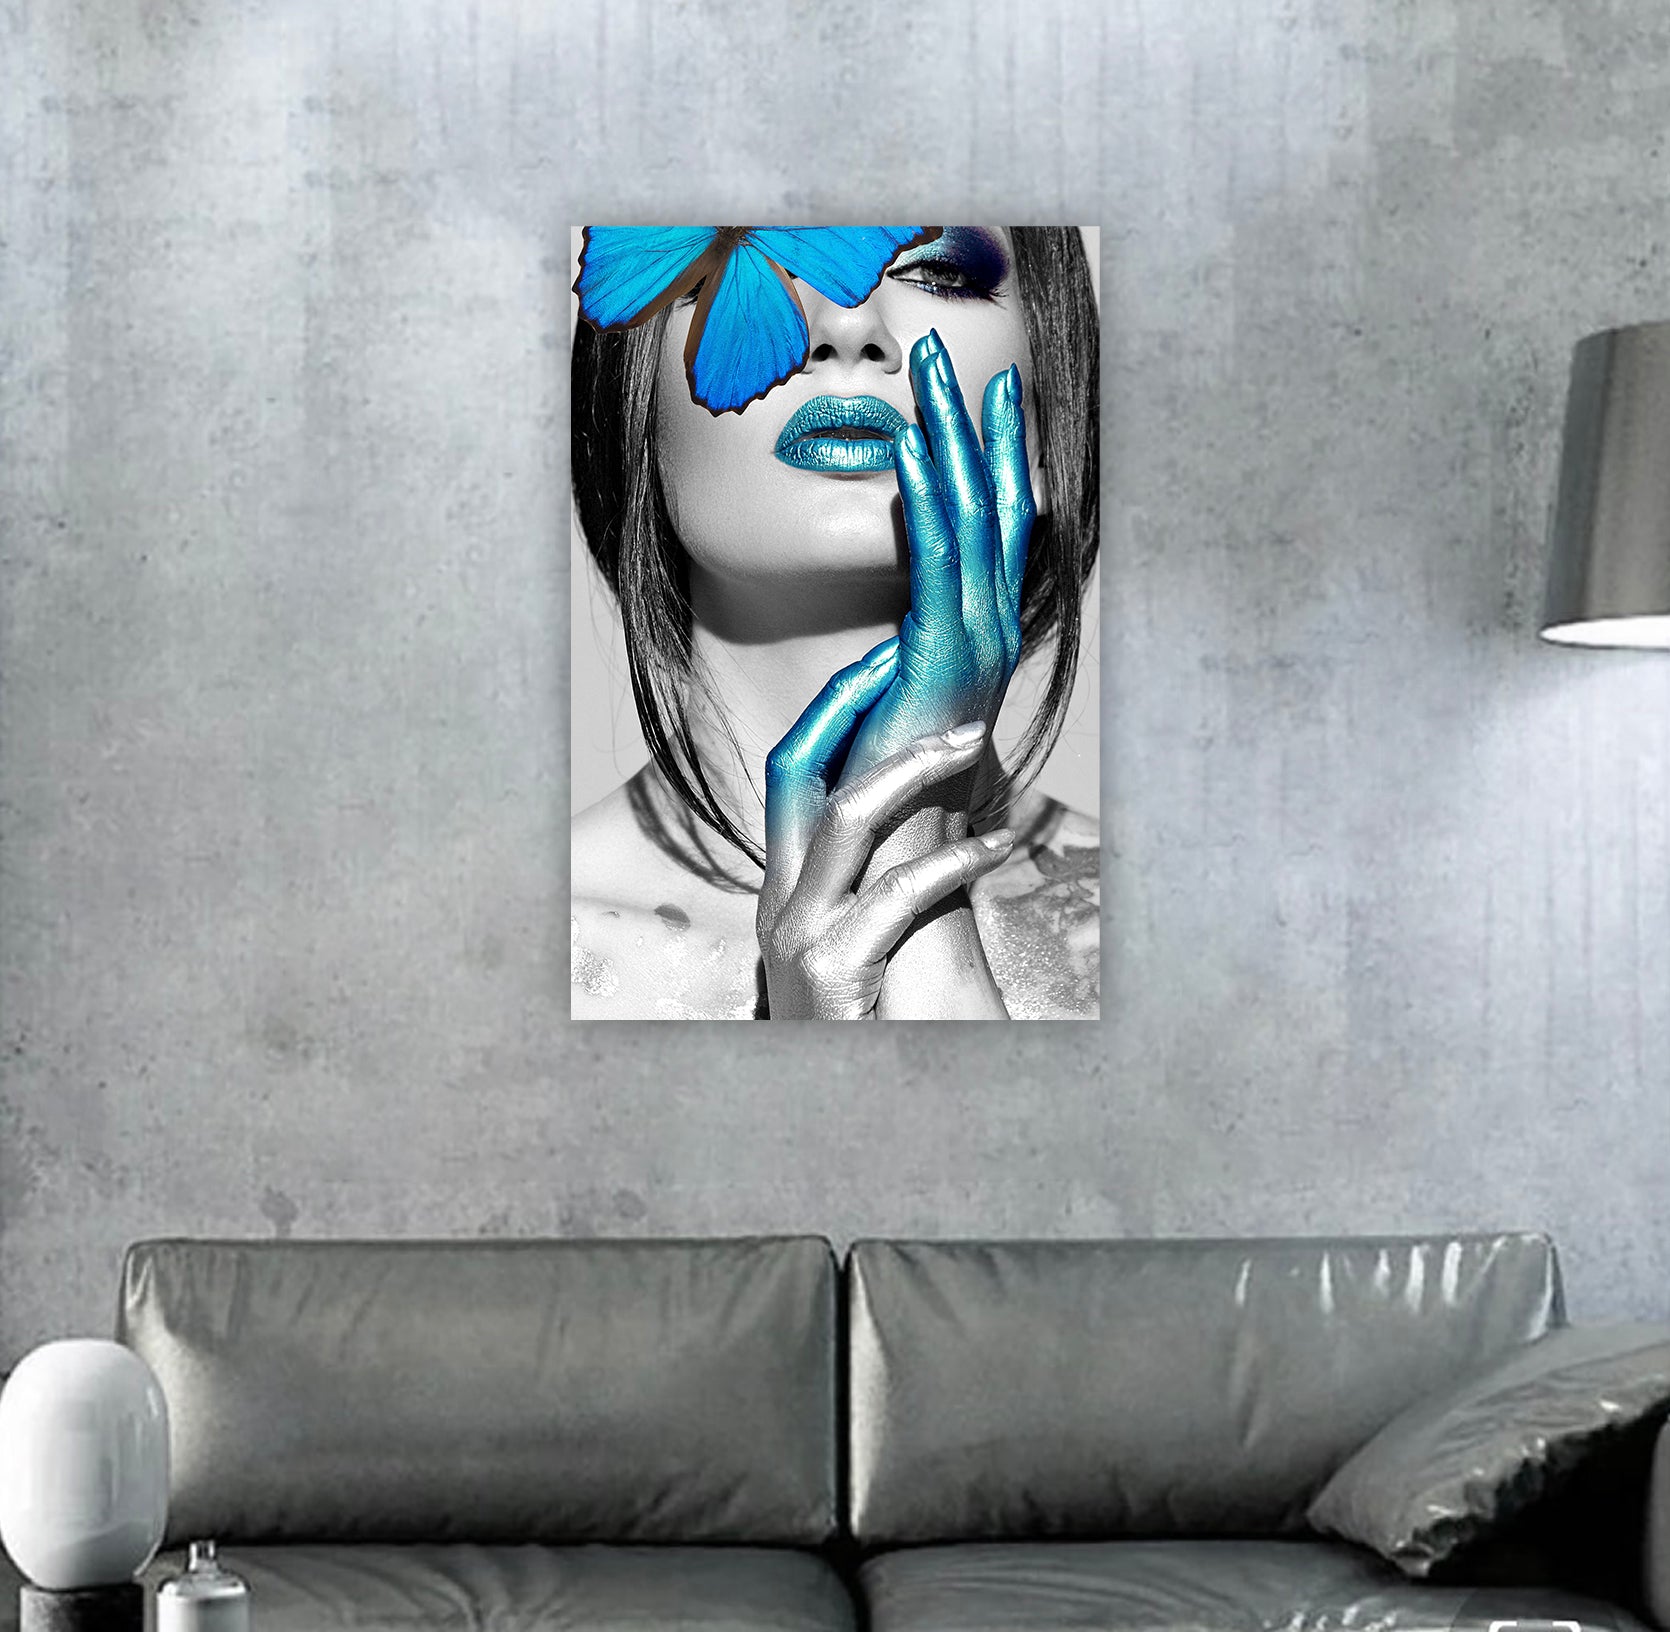 Blue Butterfly on Woman Glass Wall Art 48"x32" - Expo Home Decor